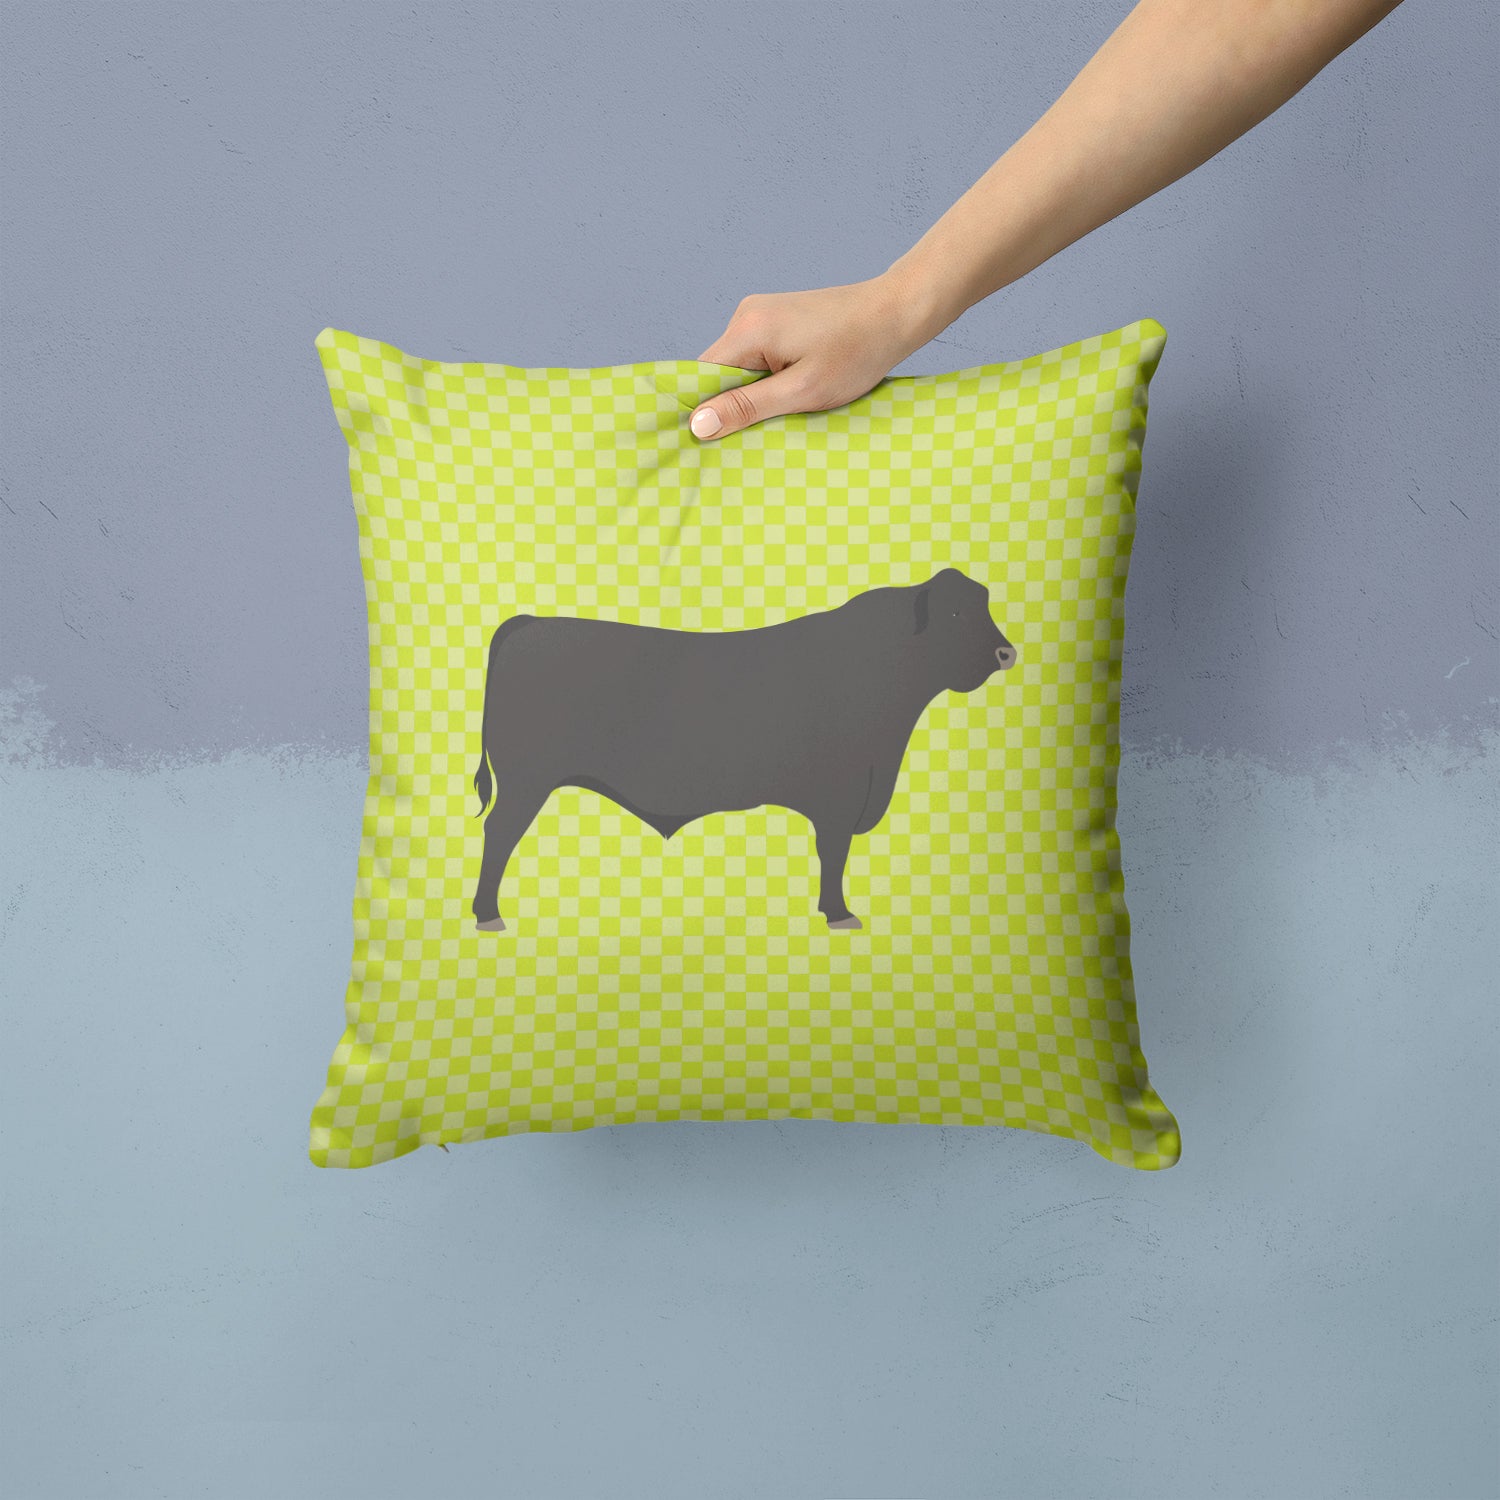 Black Angus Cow Green Fabric Decorative Pillow BB7654PW1414 - the-store.com